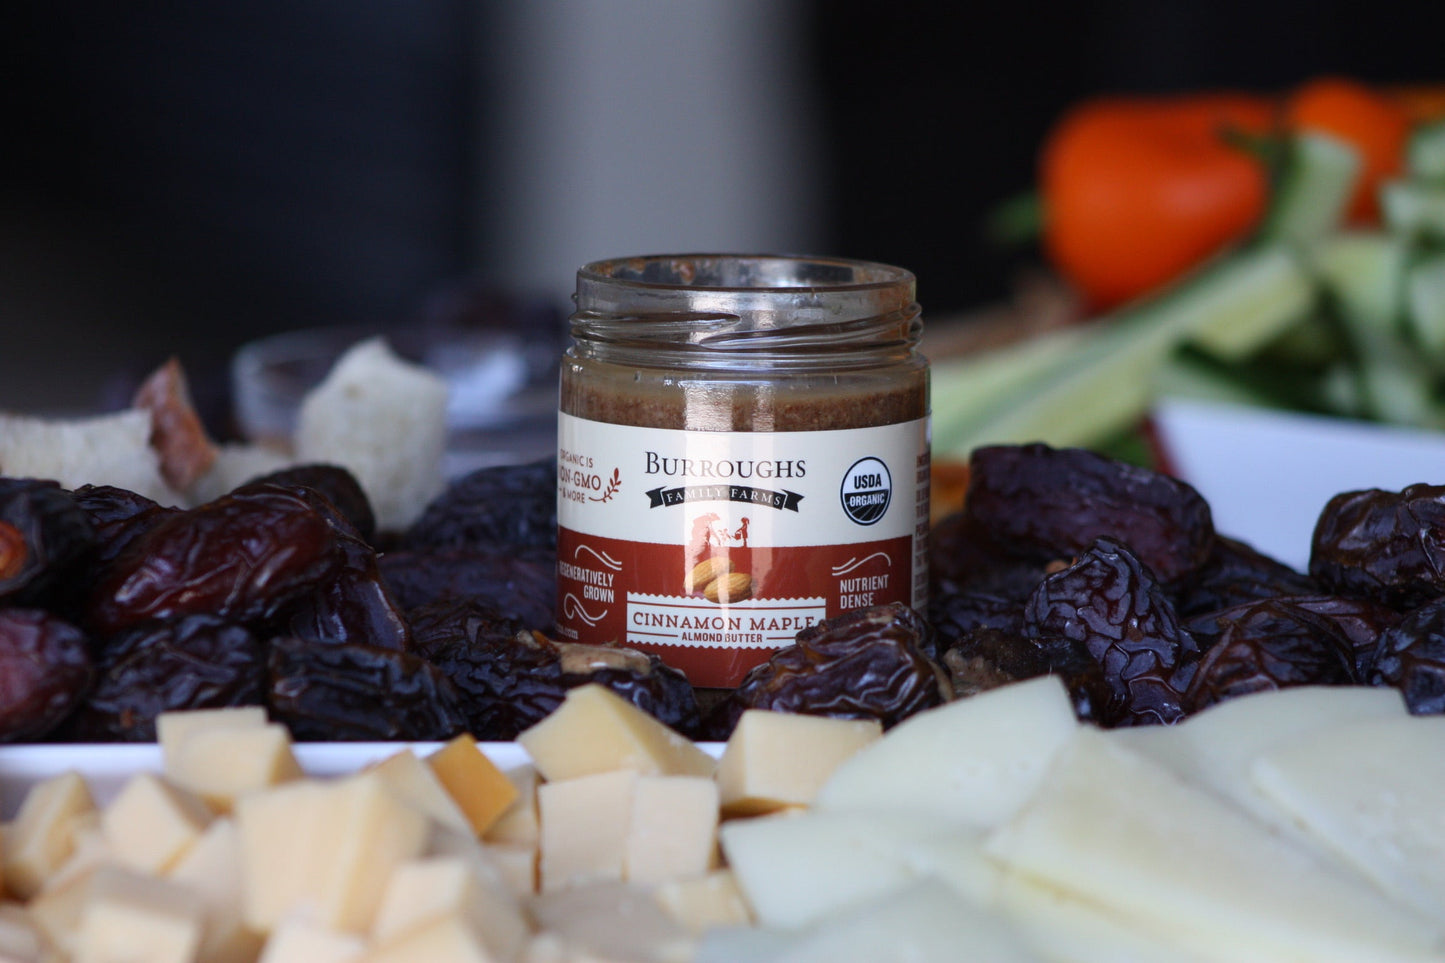 Organic Cinnamon Maple Almond Butter made with ROC Almonds by Burroughs Family Farms